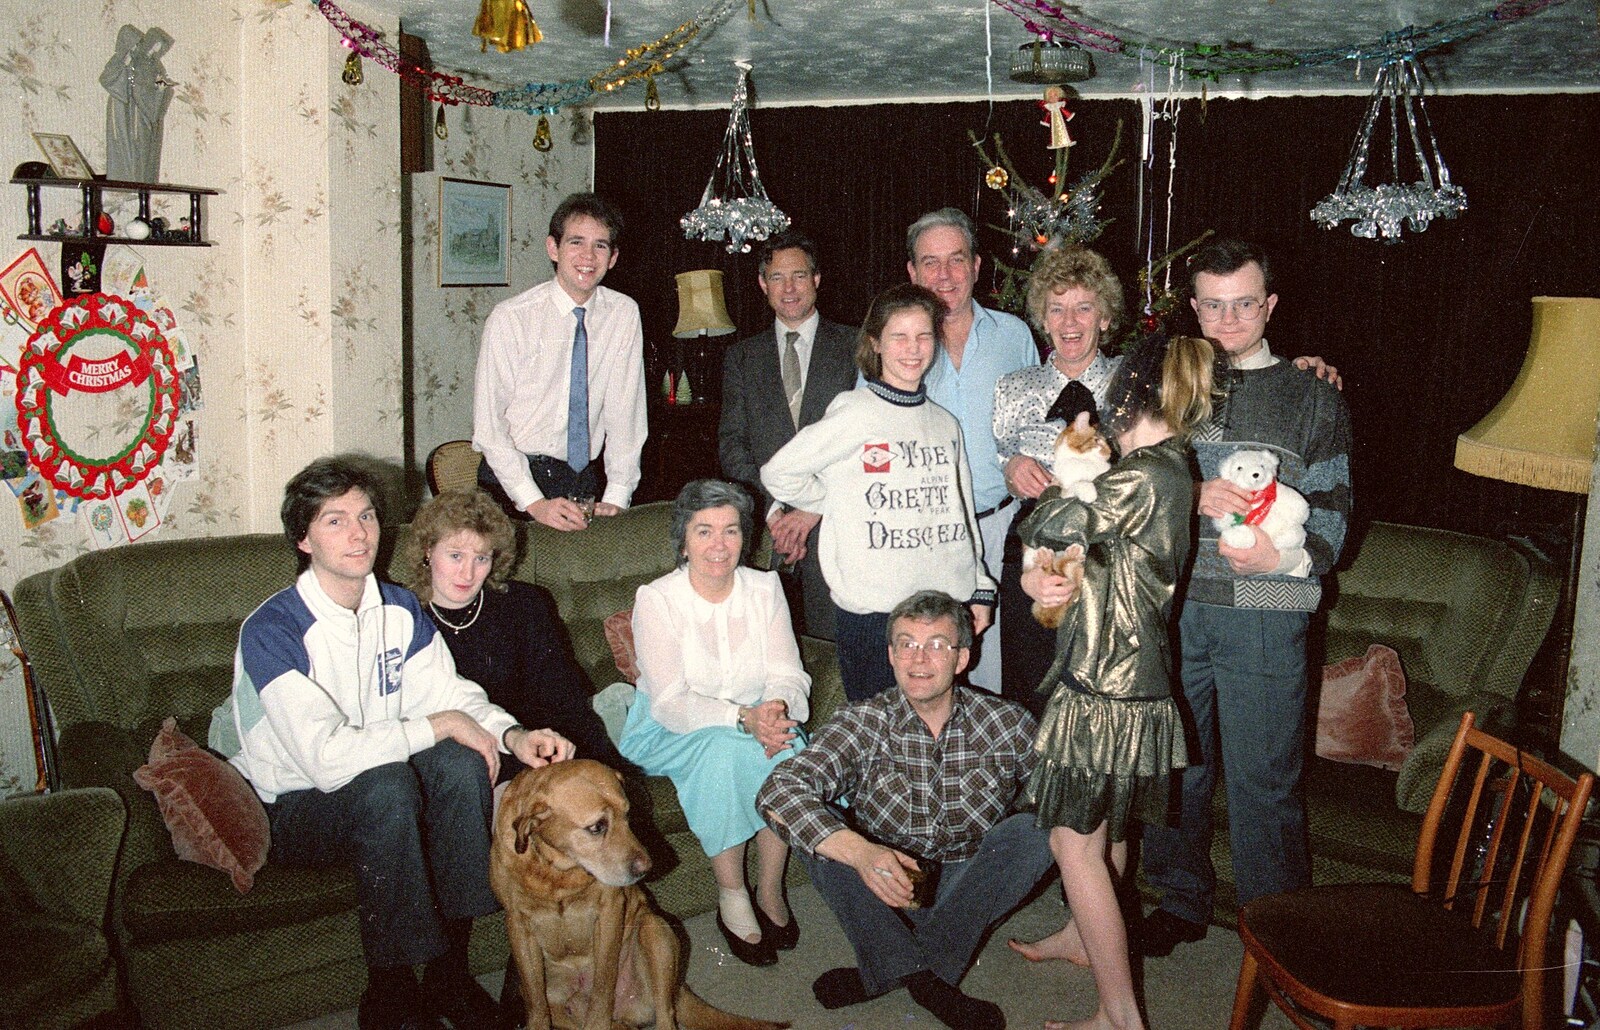 A group photo in Hamish's lounge from New Year's Eve at Hamish's, New Milton, Hampshire - 31st December 1988